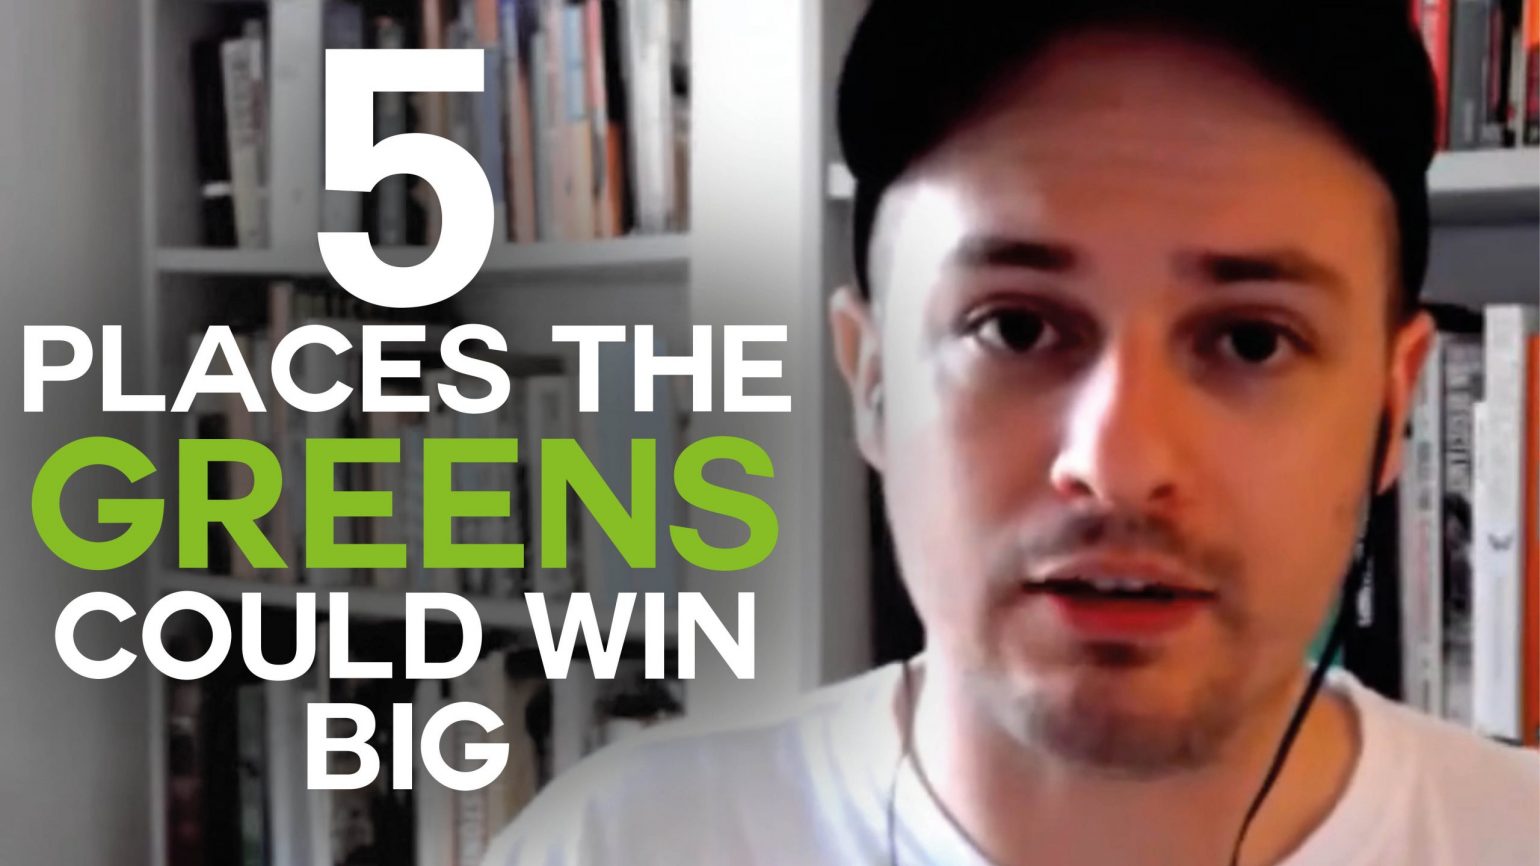 A still of a video with Chris Jarvis with text overlaid reading "5 places the Greens could win big"